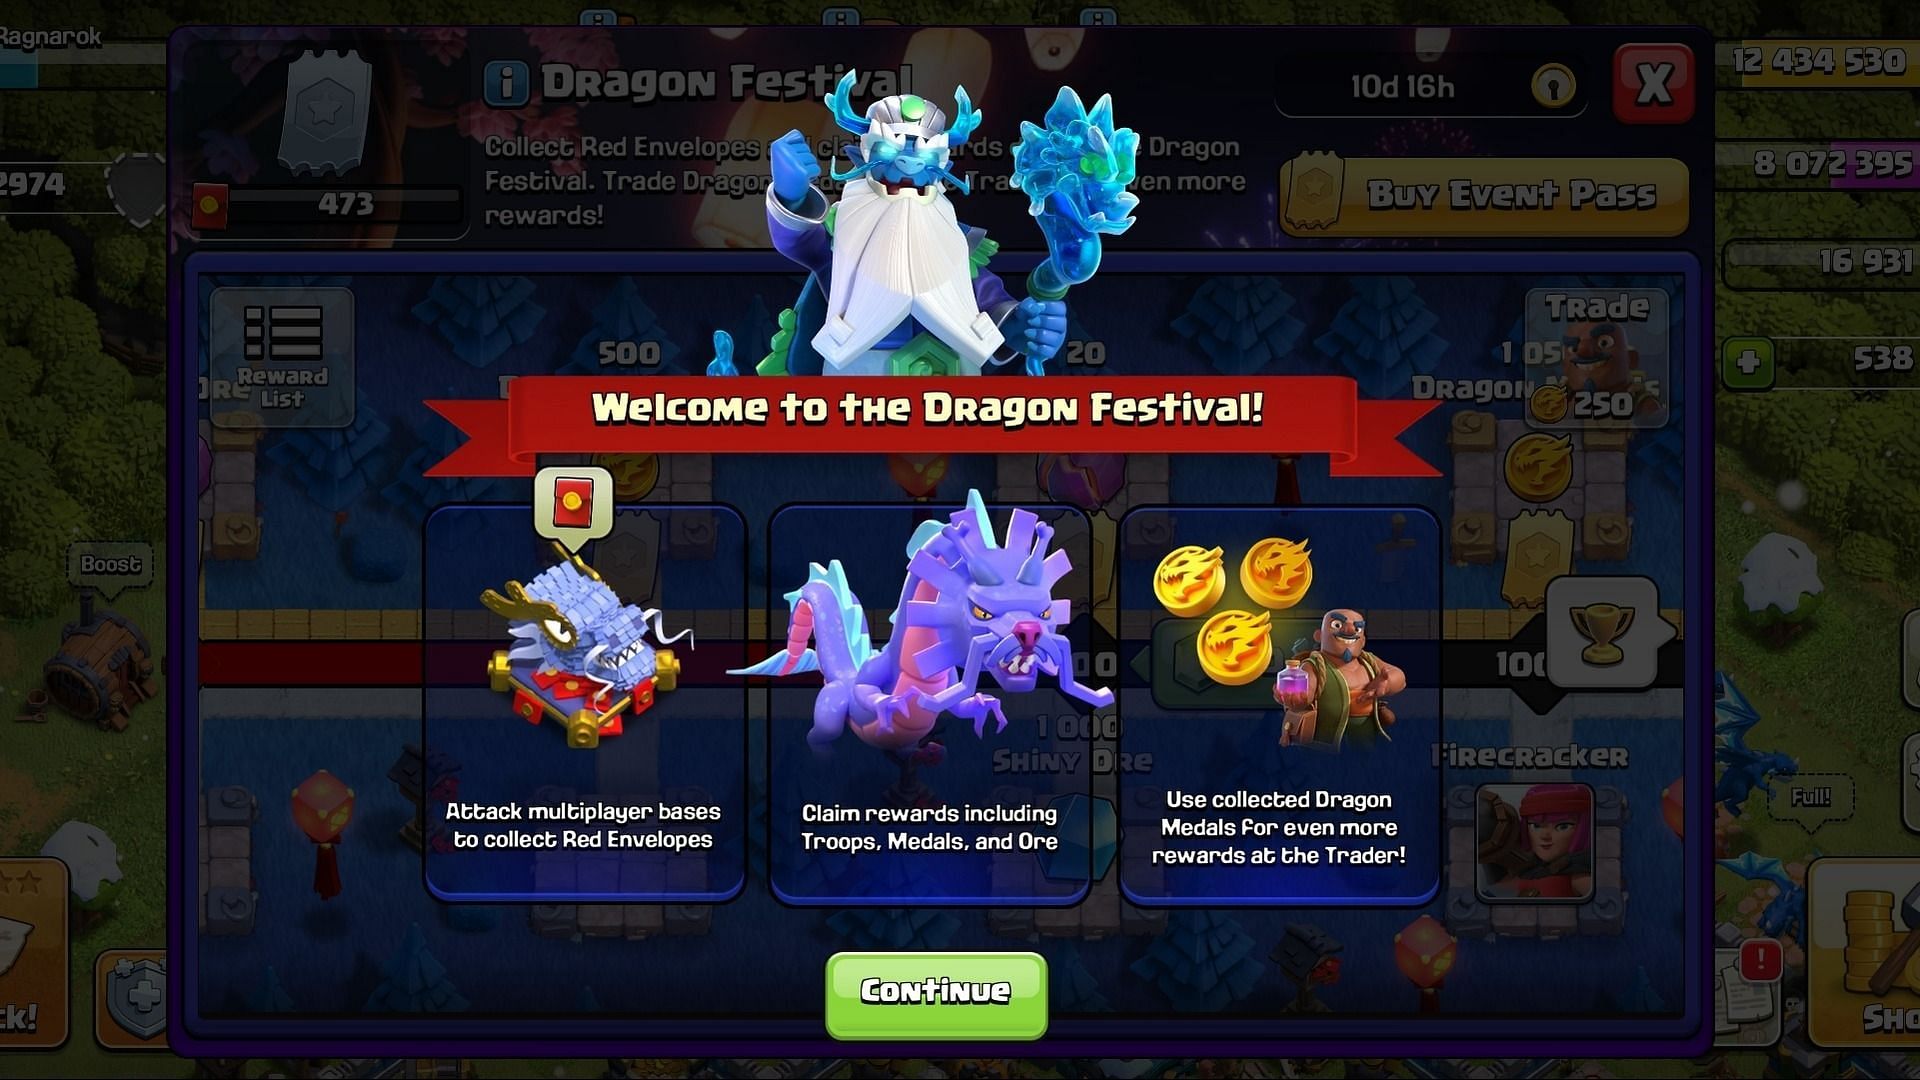 Earn Dragon Medals [(Image via Supercell) In-game screenshot taken by the writer]